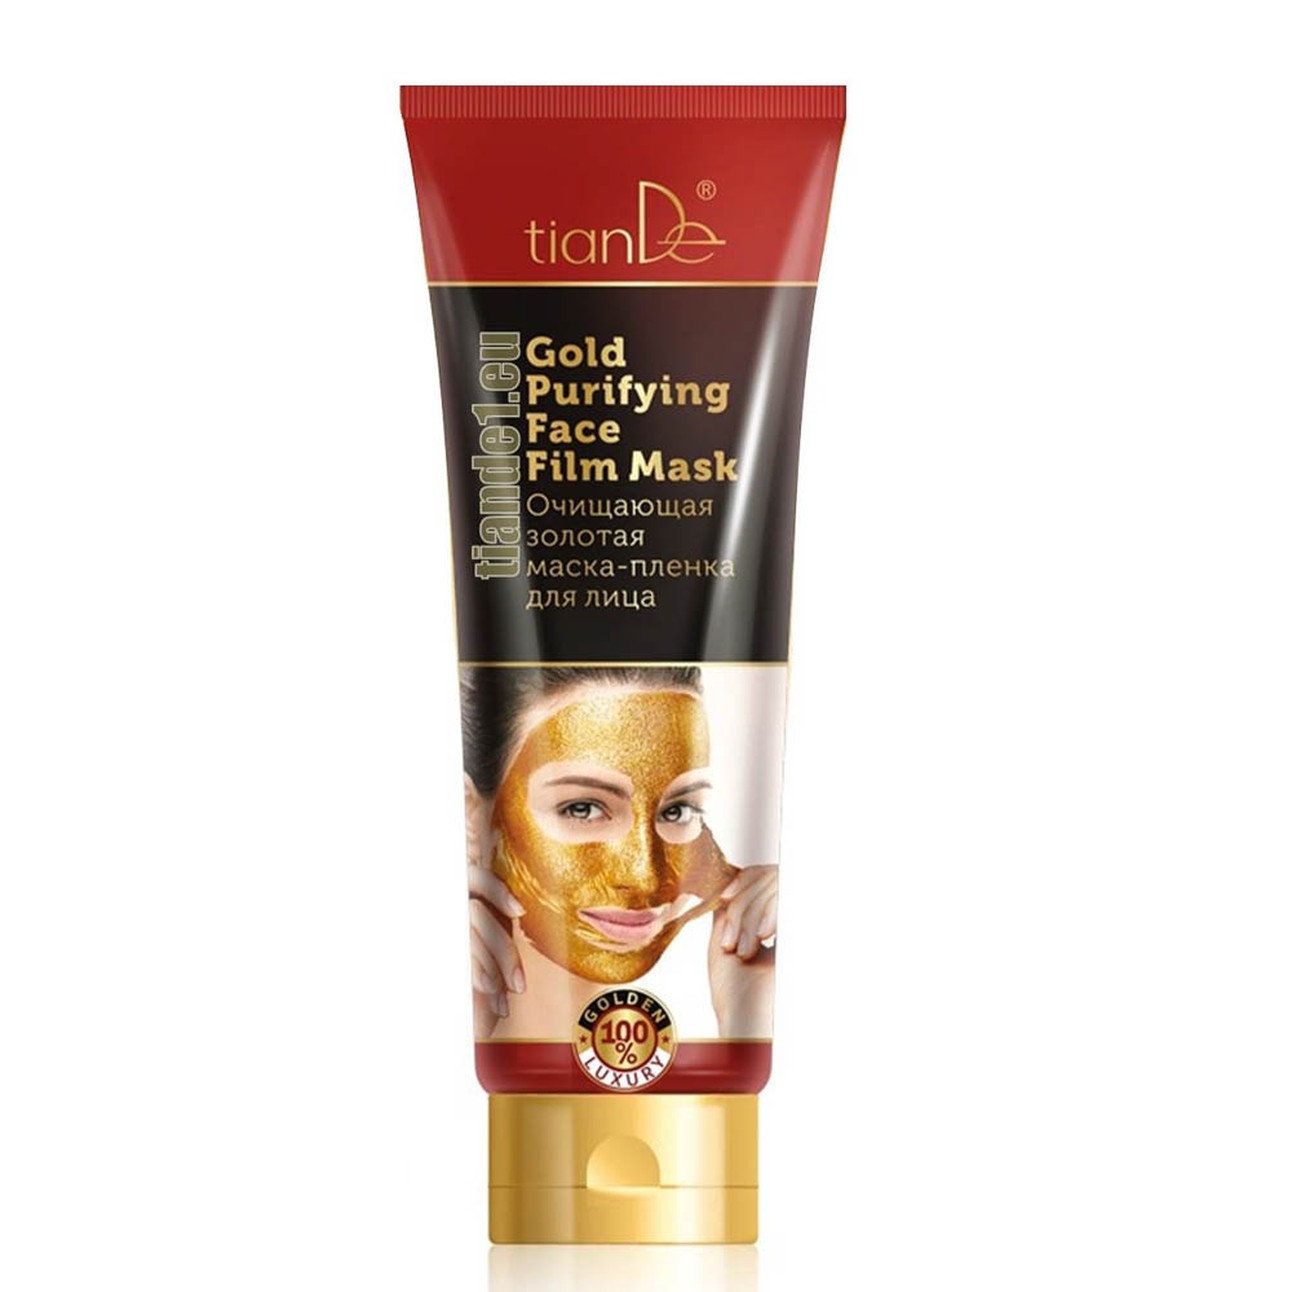 Gold Purifying Face Film Mask.    ◼8 POINTS